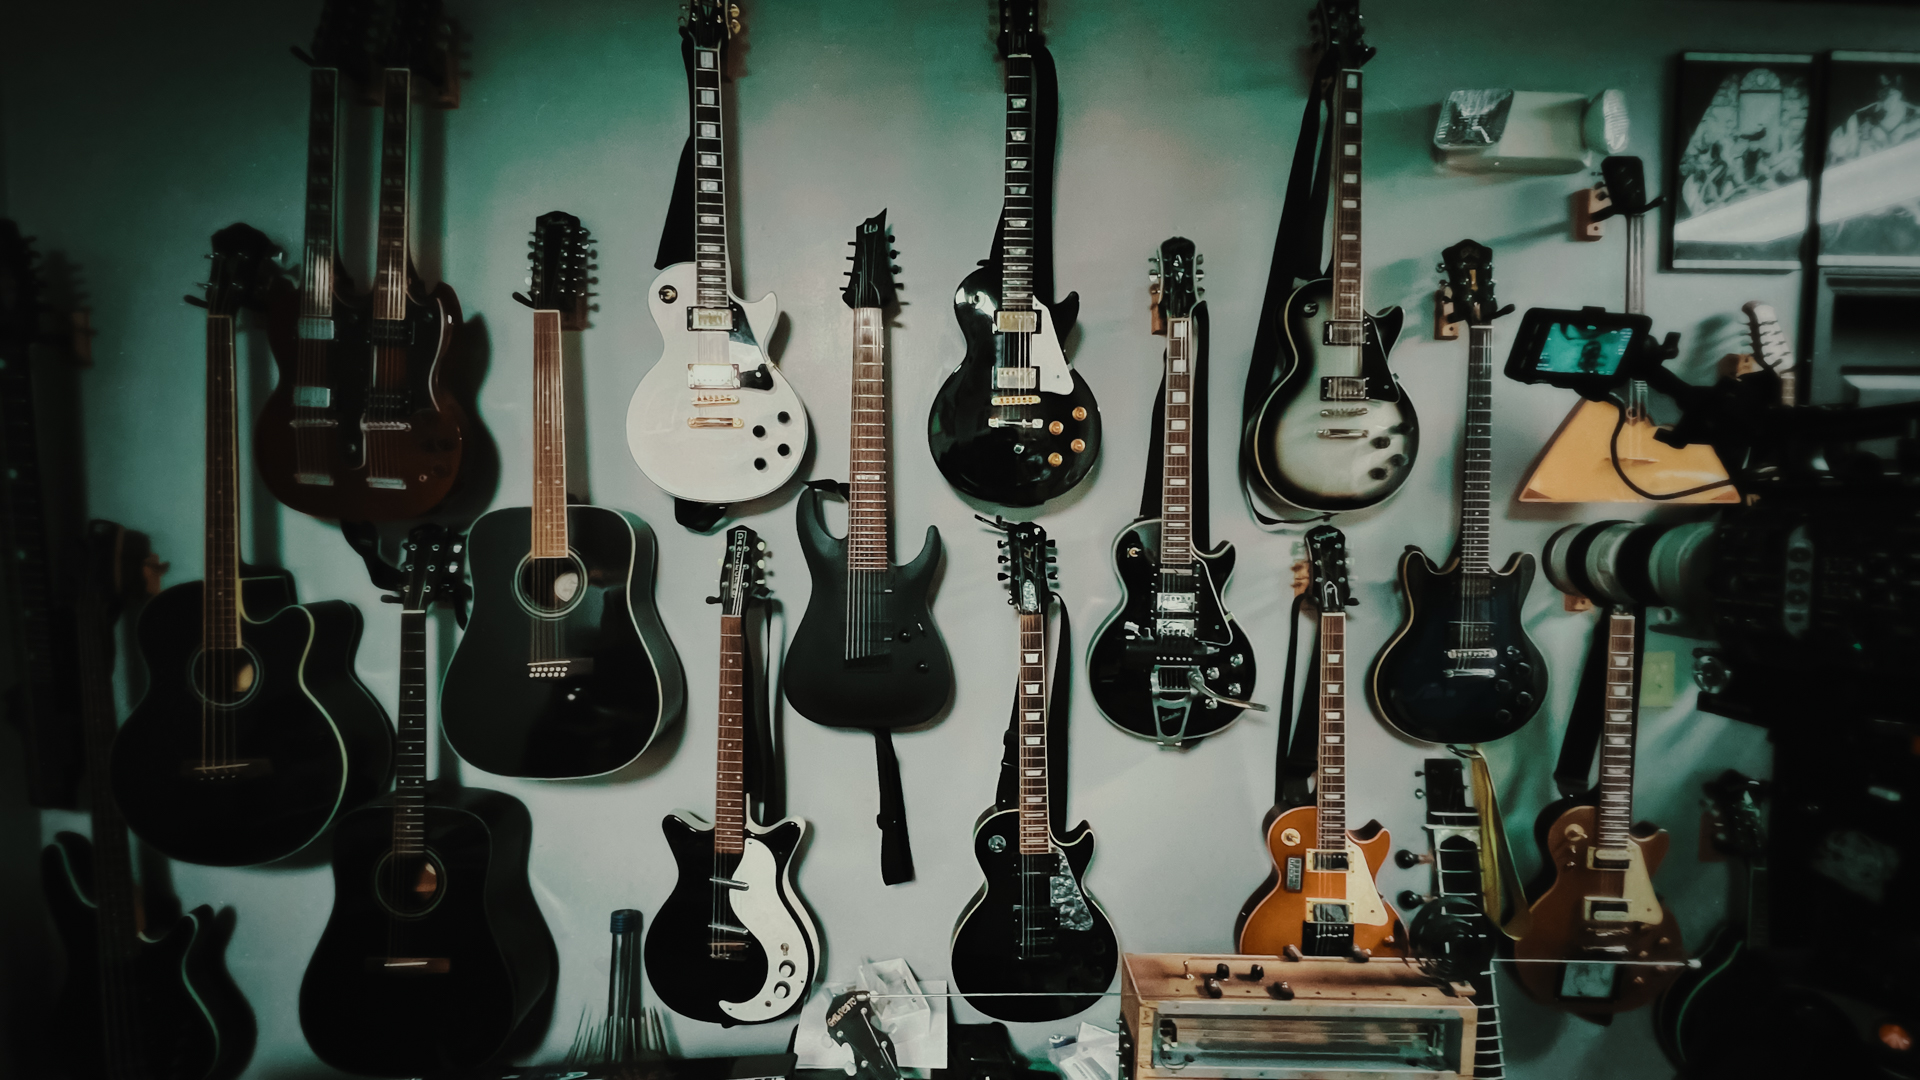 guitars line a green wall in a behind the scenes photo